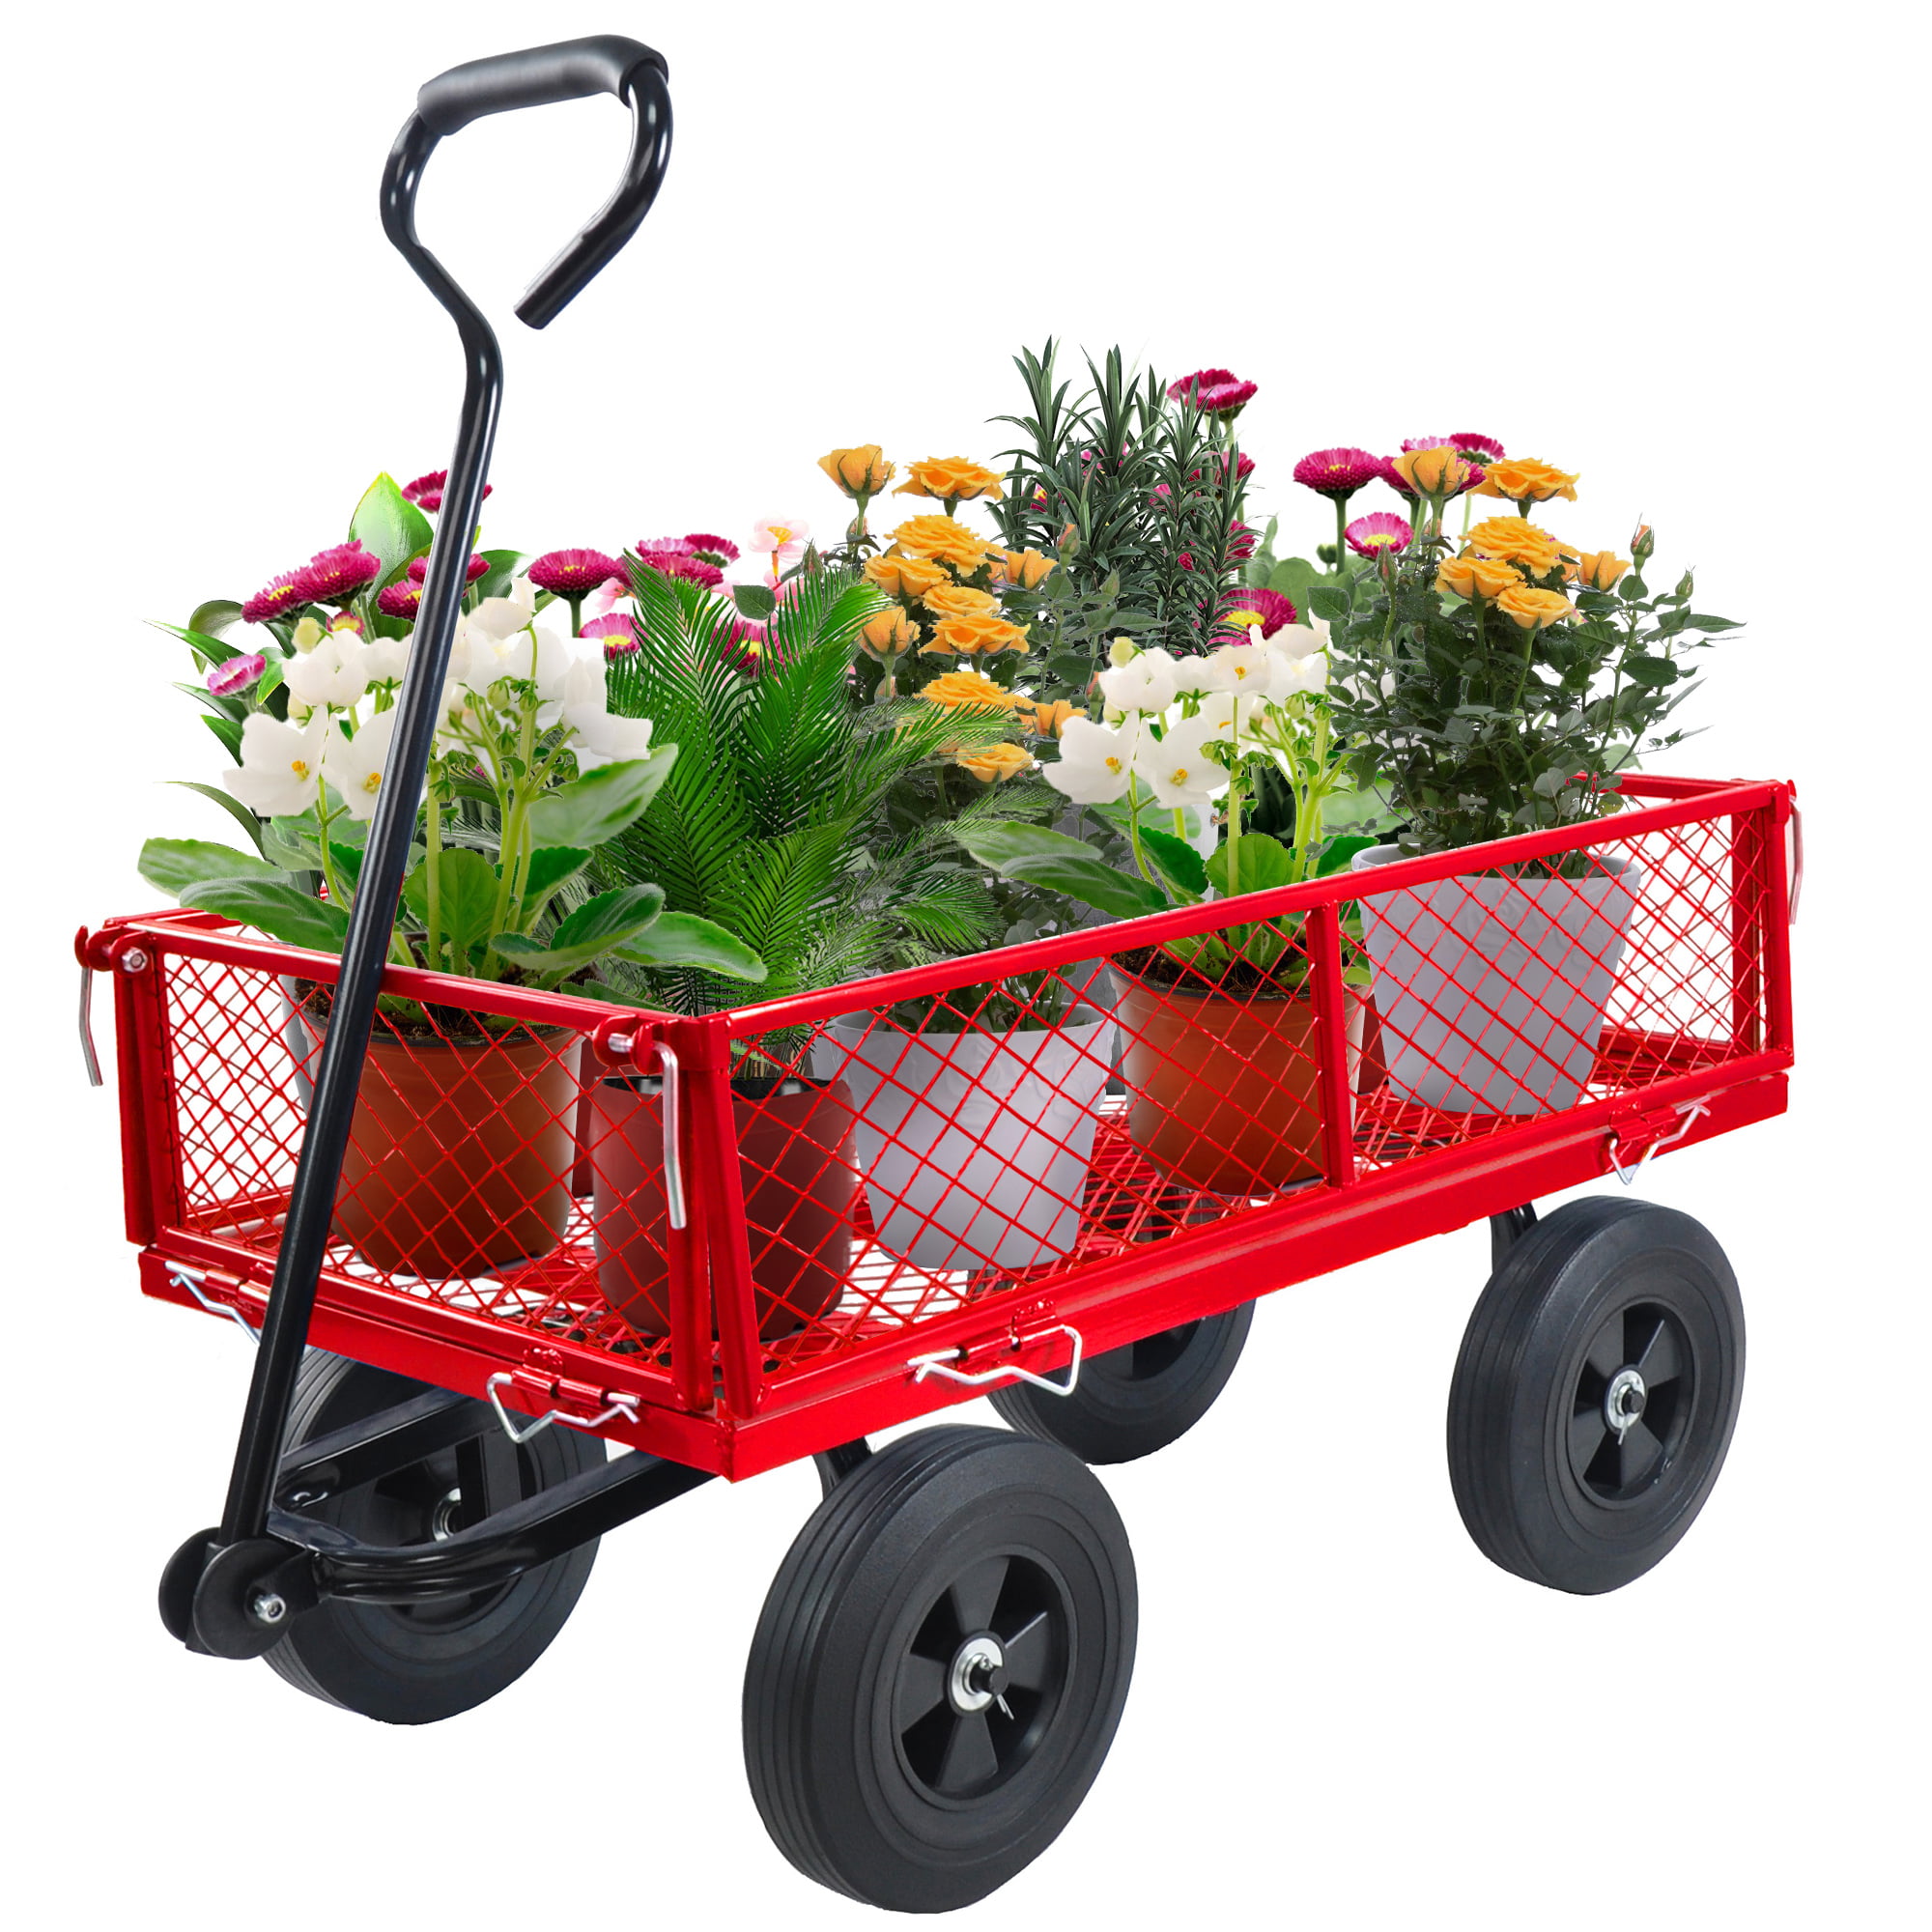 Large Capacity Rolling Utility Dump Cart for Residential DIY Landscaping Lawn Care and Remodeling PURNC 50-LG1079 Pure 2-Wheeled Garden Wheelbarrow Pure Garden 